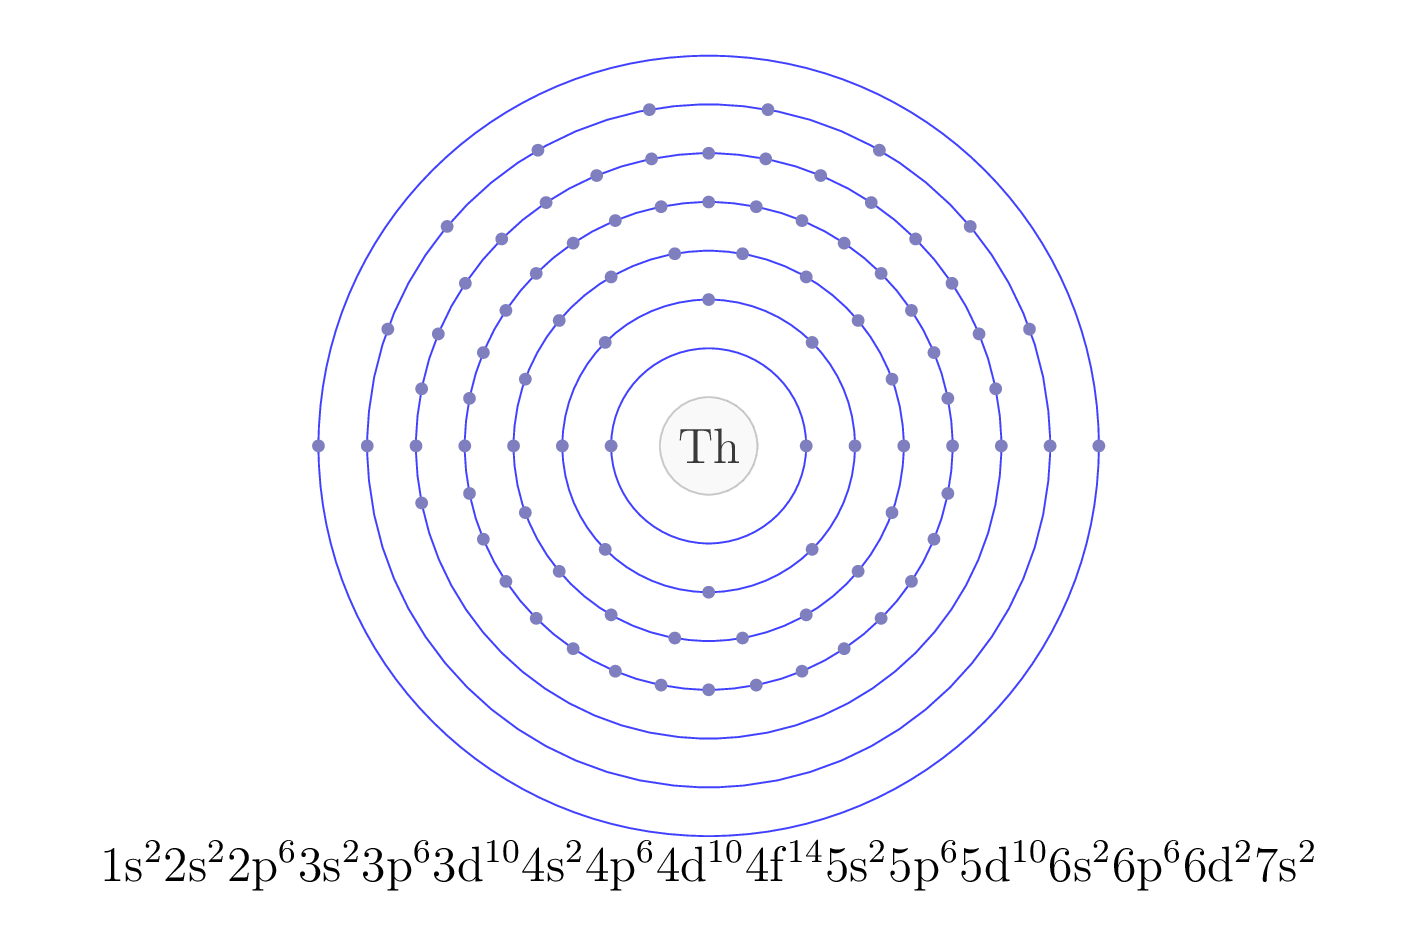 electron configuration of element Th